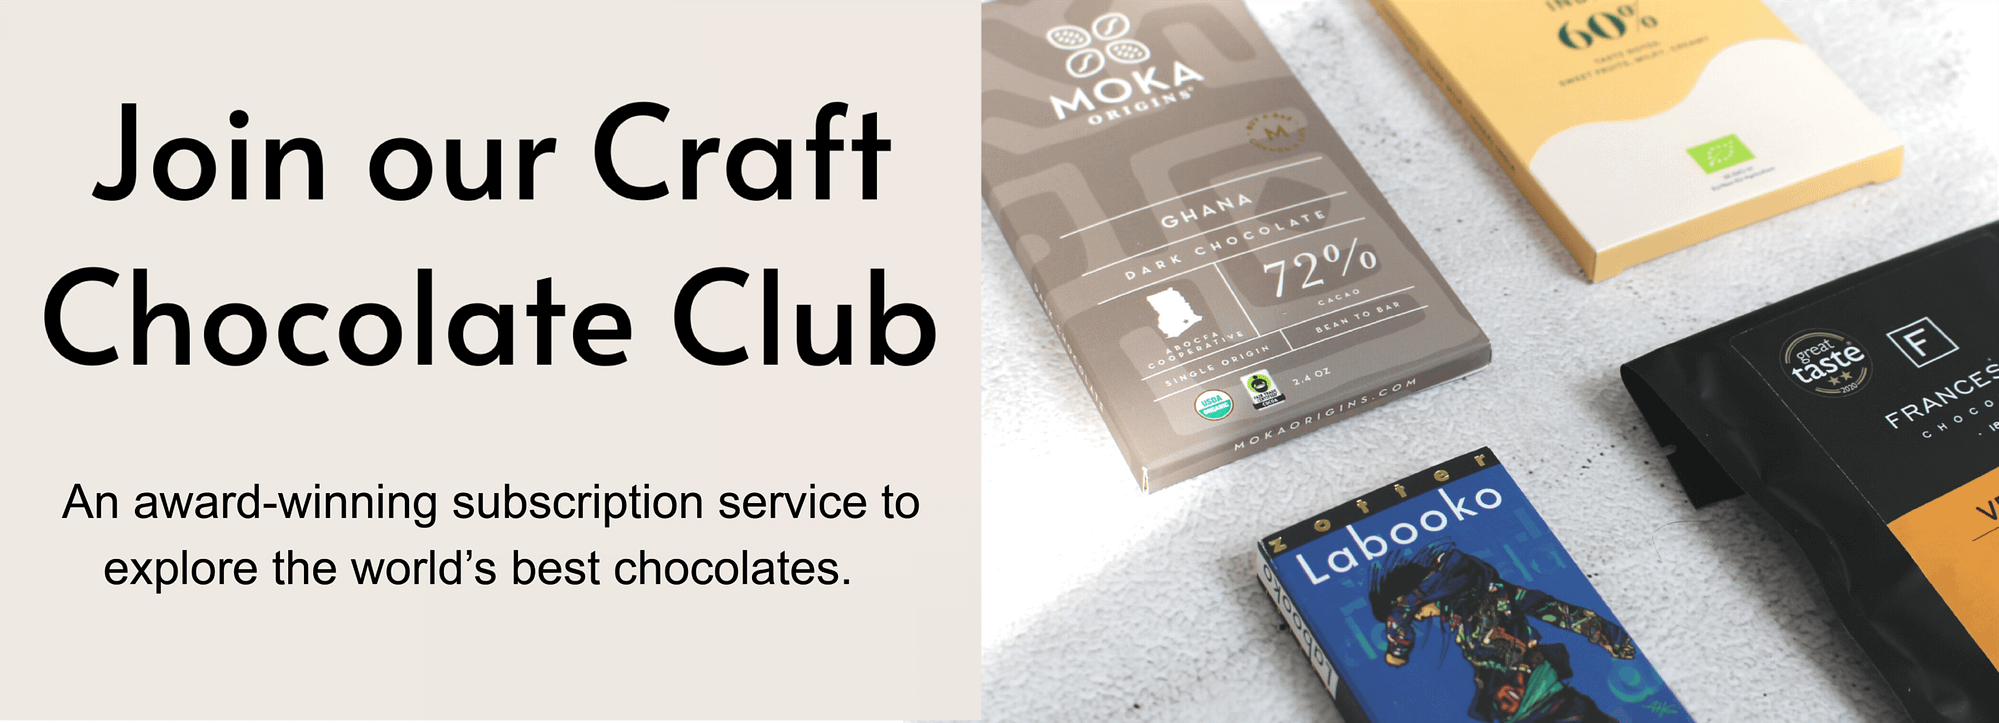 join our craft chocolate club banner